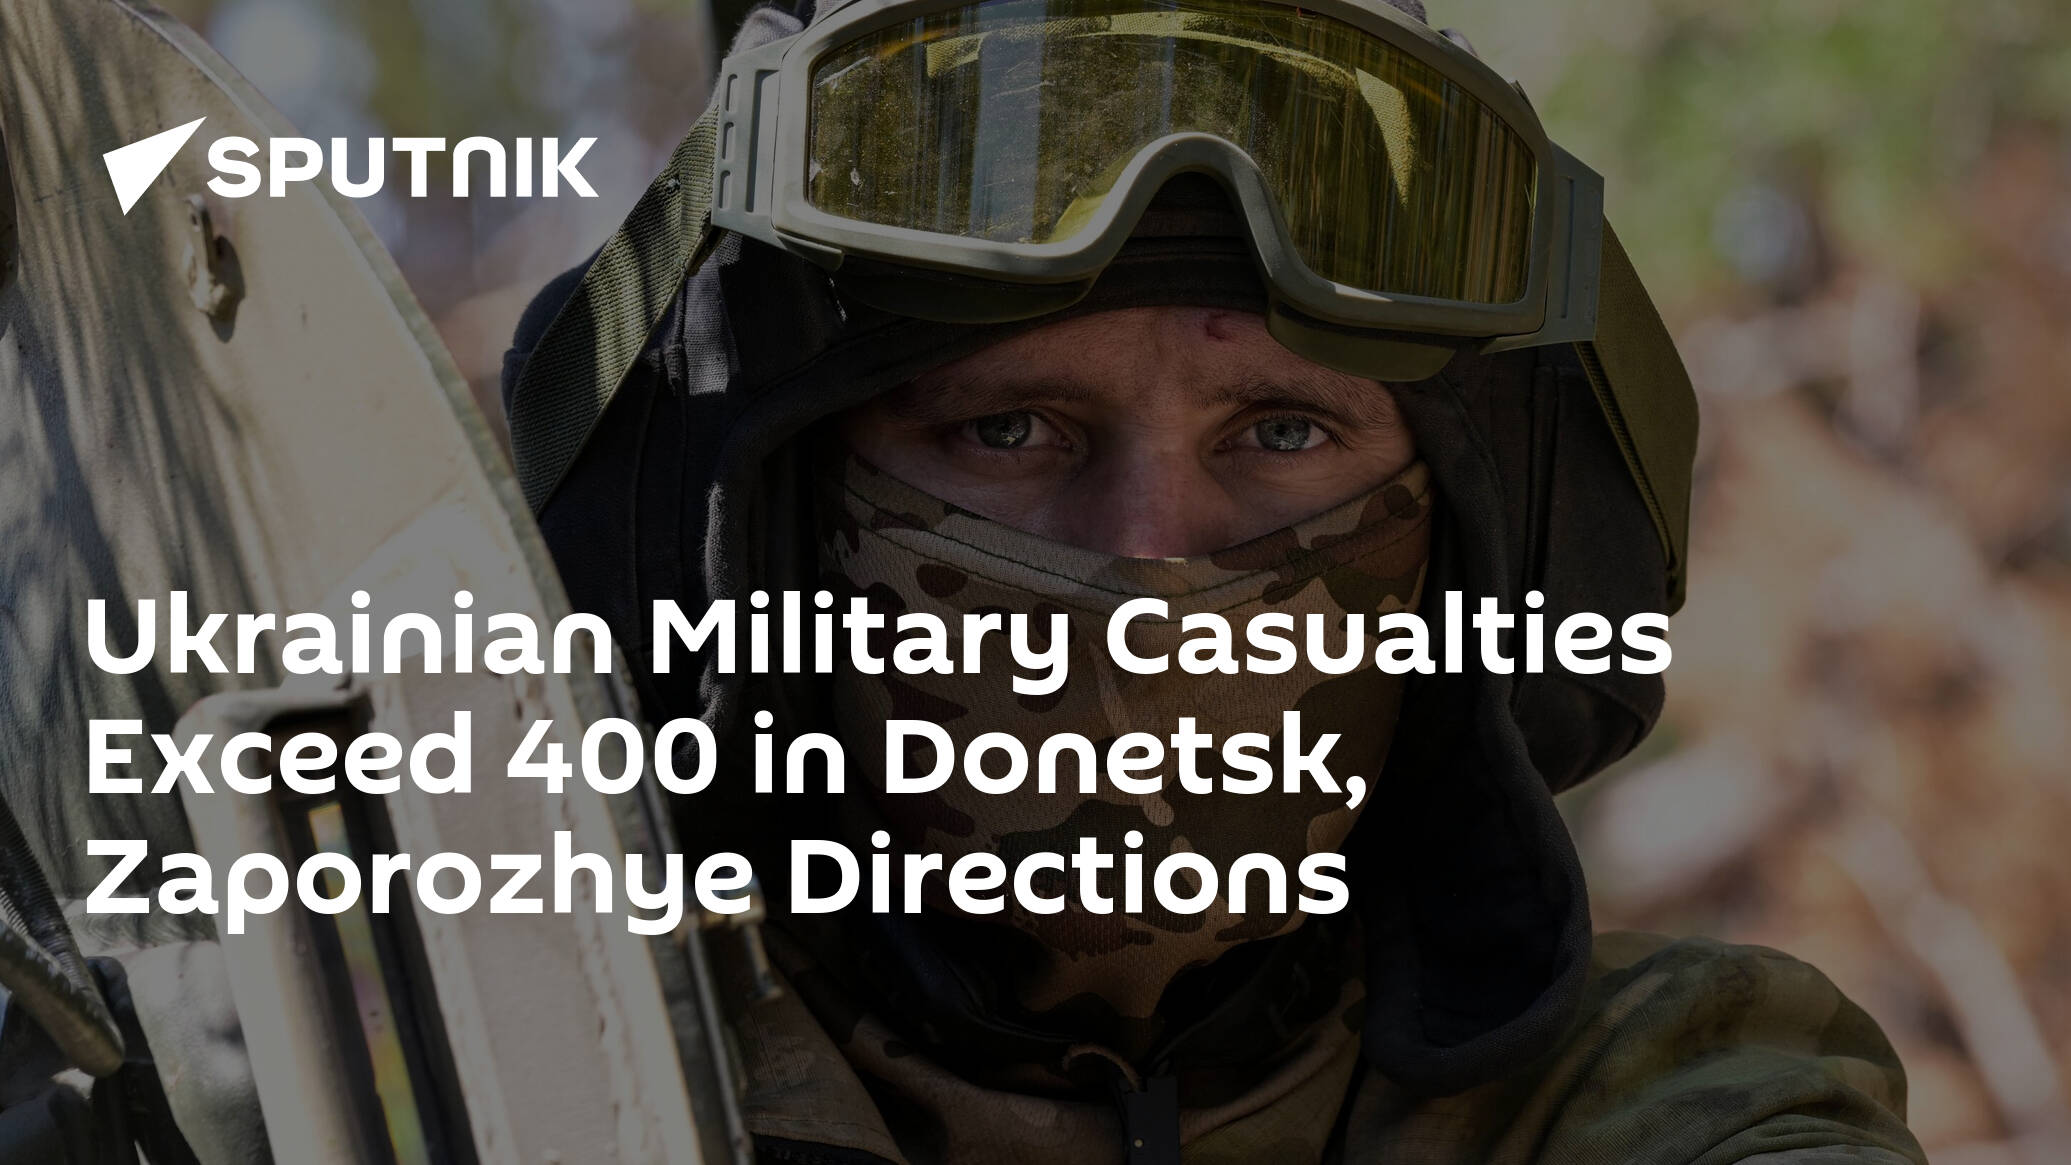 Ukrainian Military Casualties Exceed 400 in Donetsk, Zaporozhye Directions